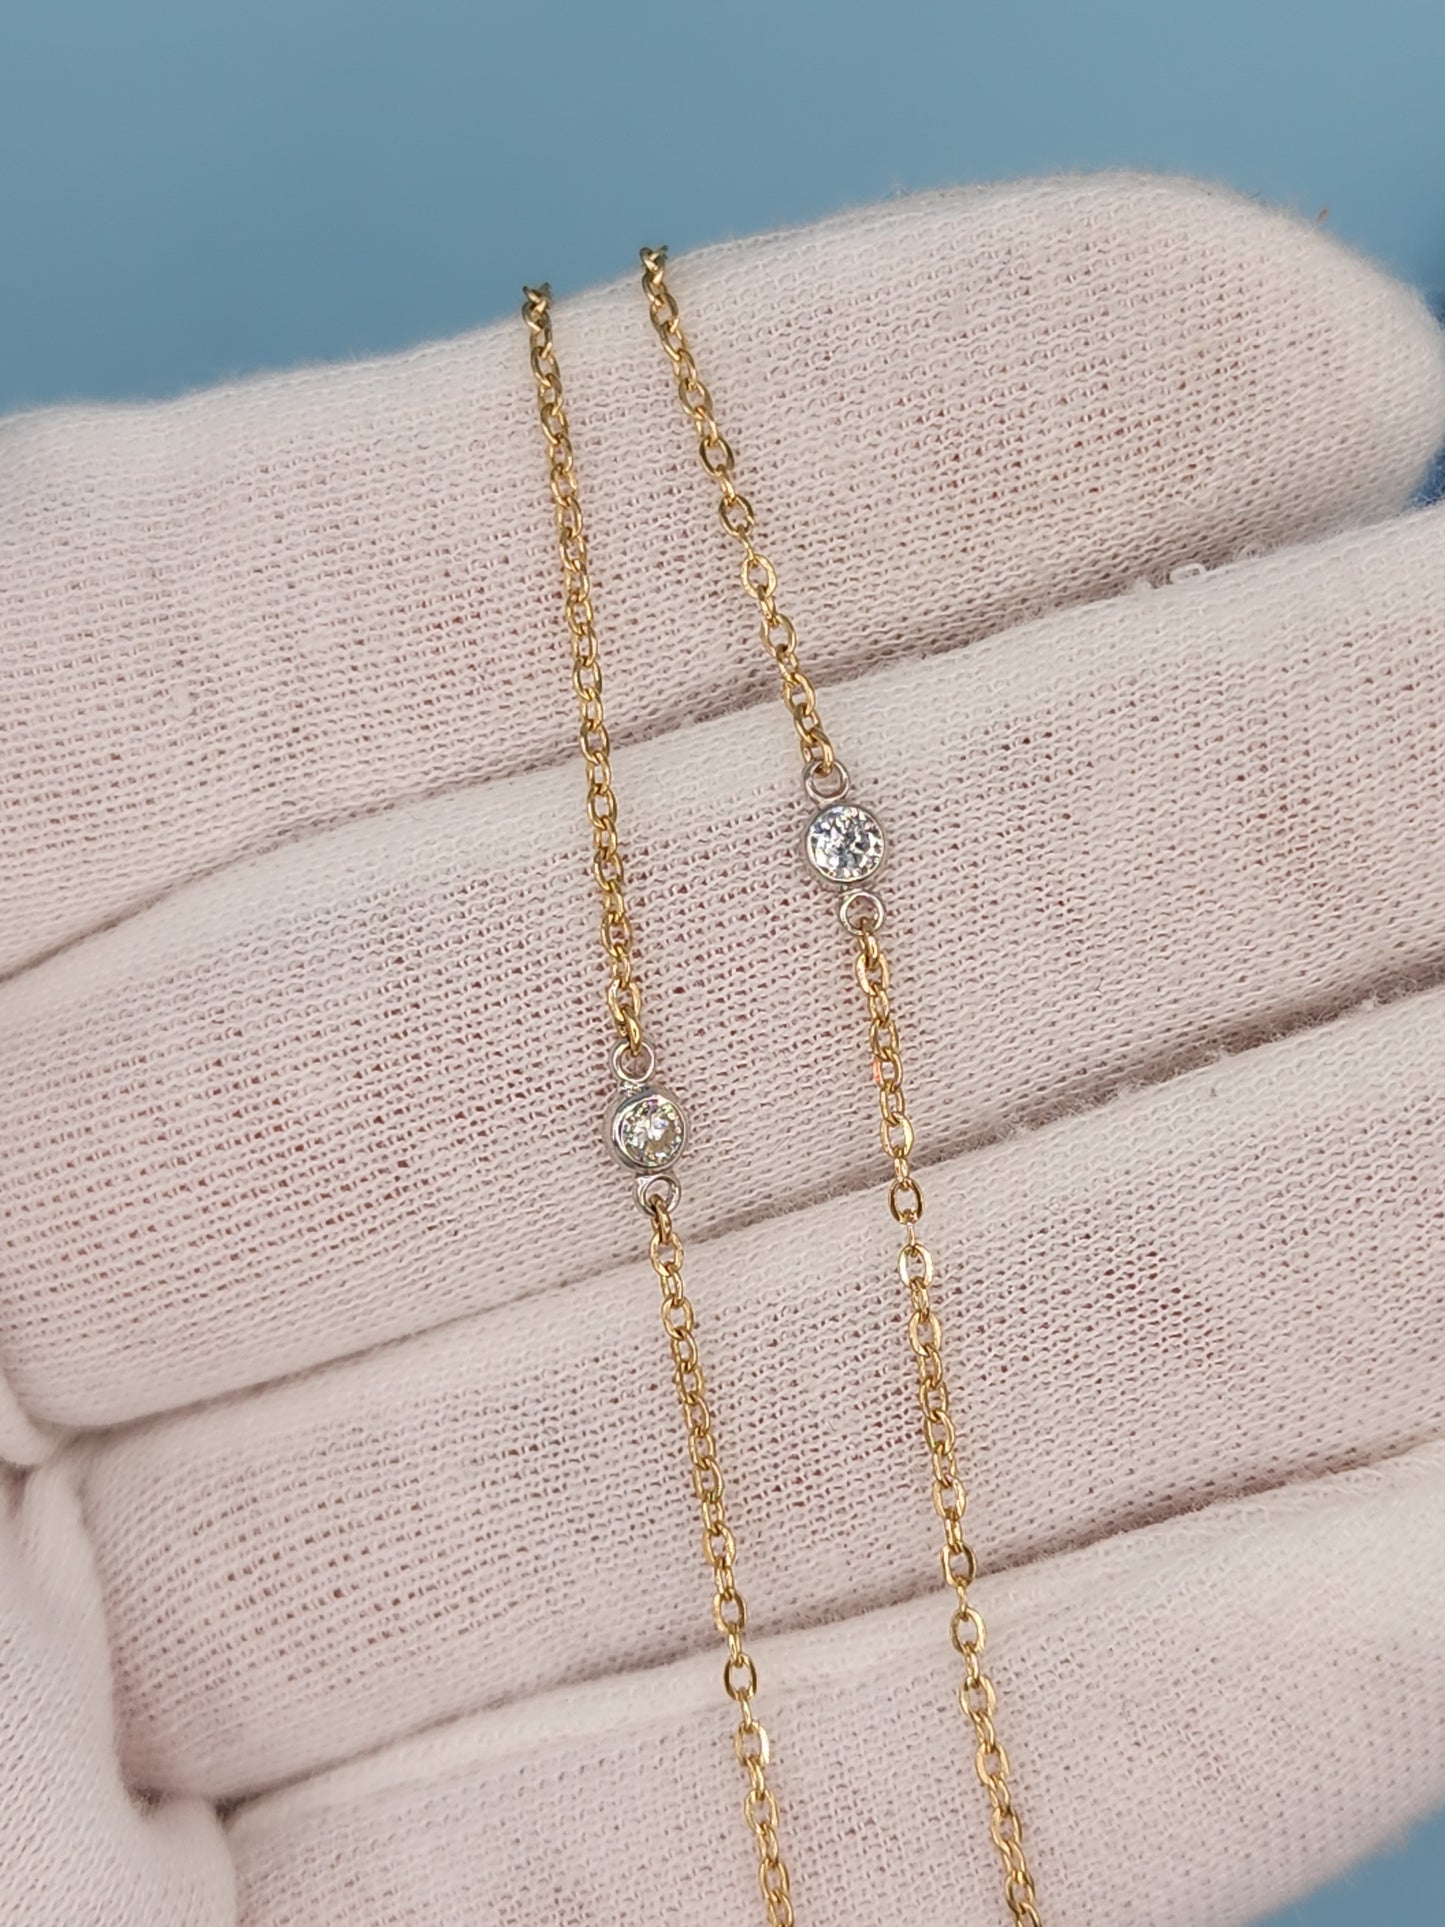 5 Natural Diamonds Station Necklace 14k Gold 25 inches long